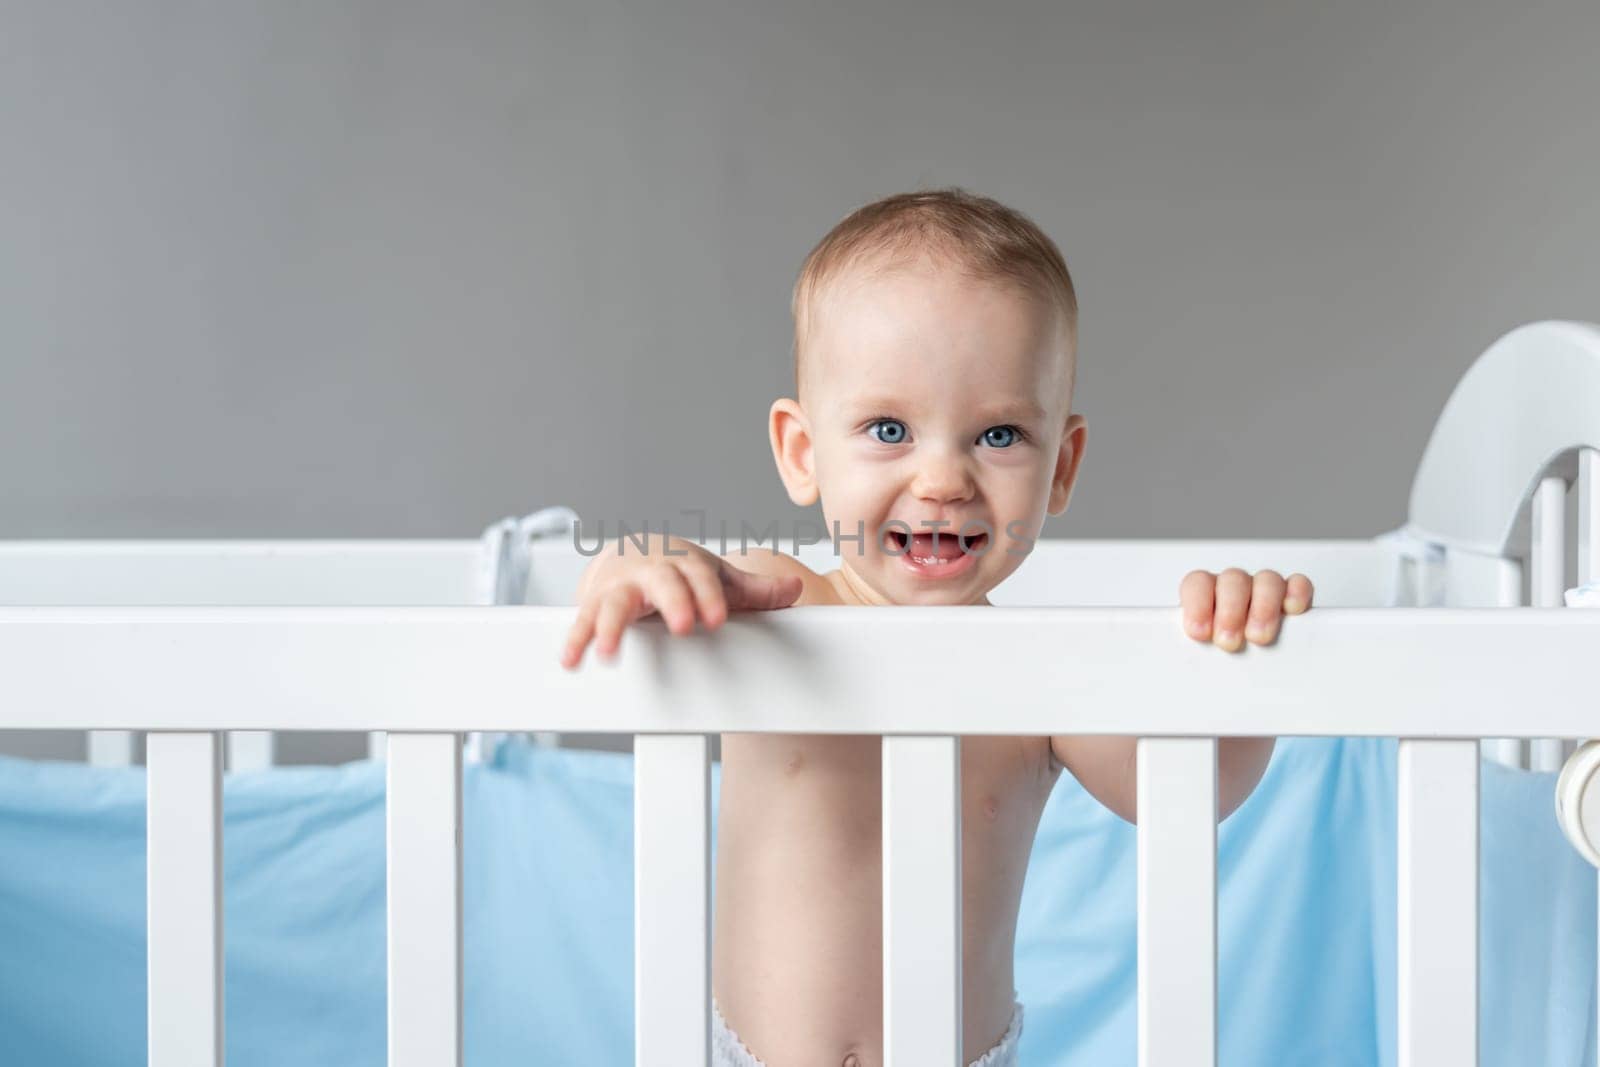 Laughing baby reaching out from his crib by sdf_qwe